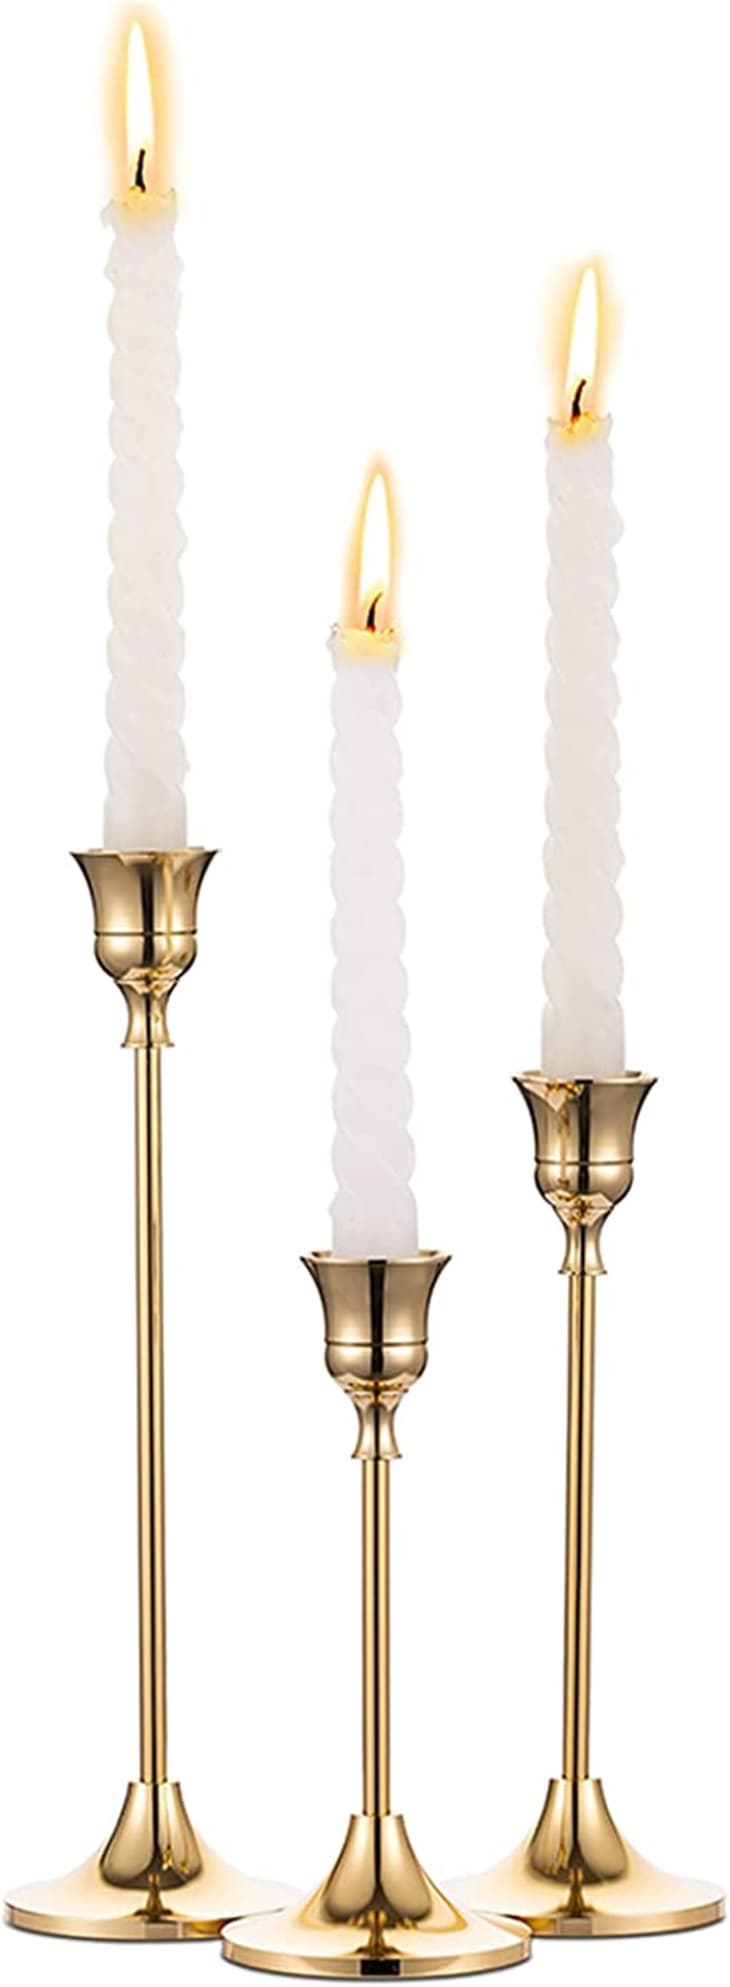 Candlestick Holders Taper Candle Holders, Set of 3 at Amazon